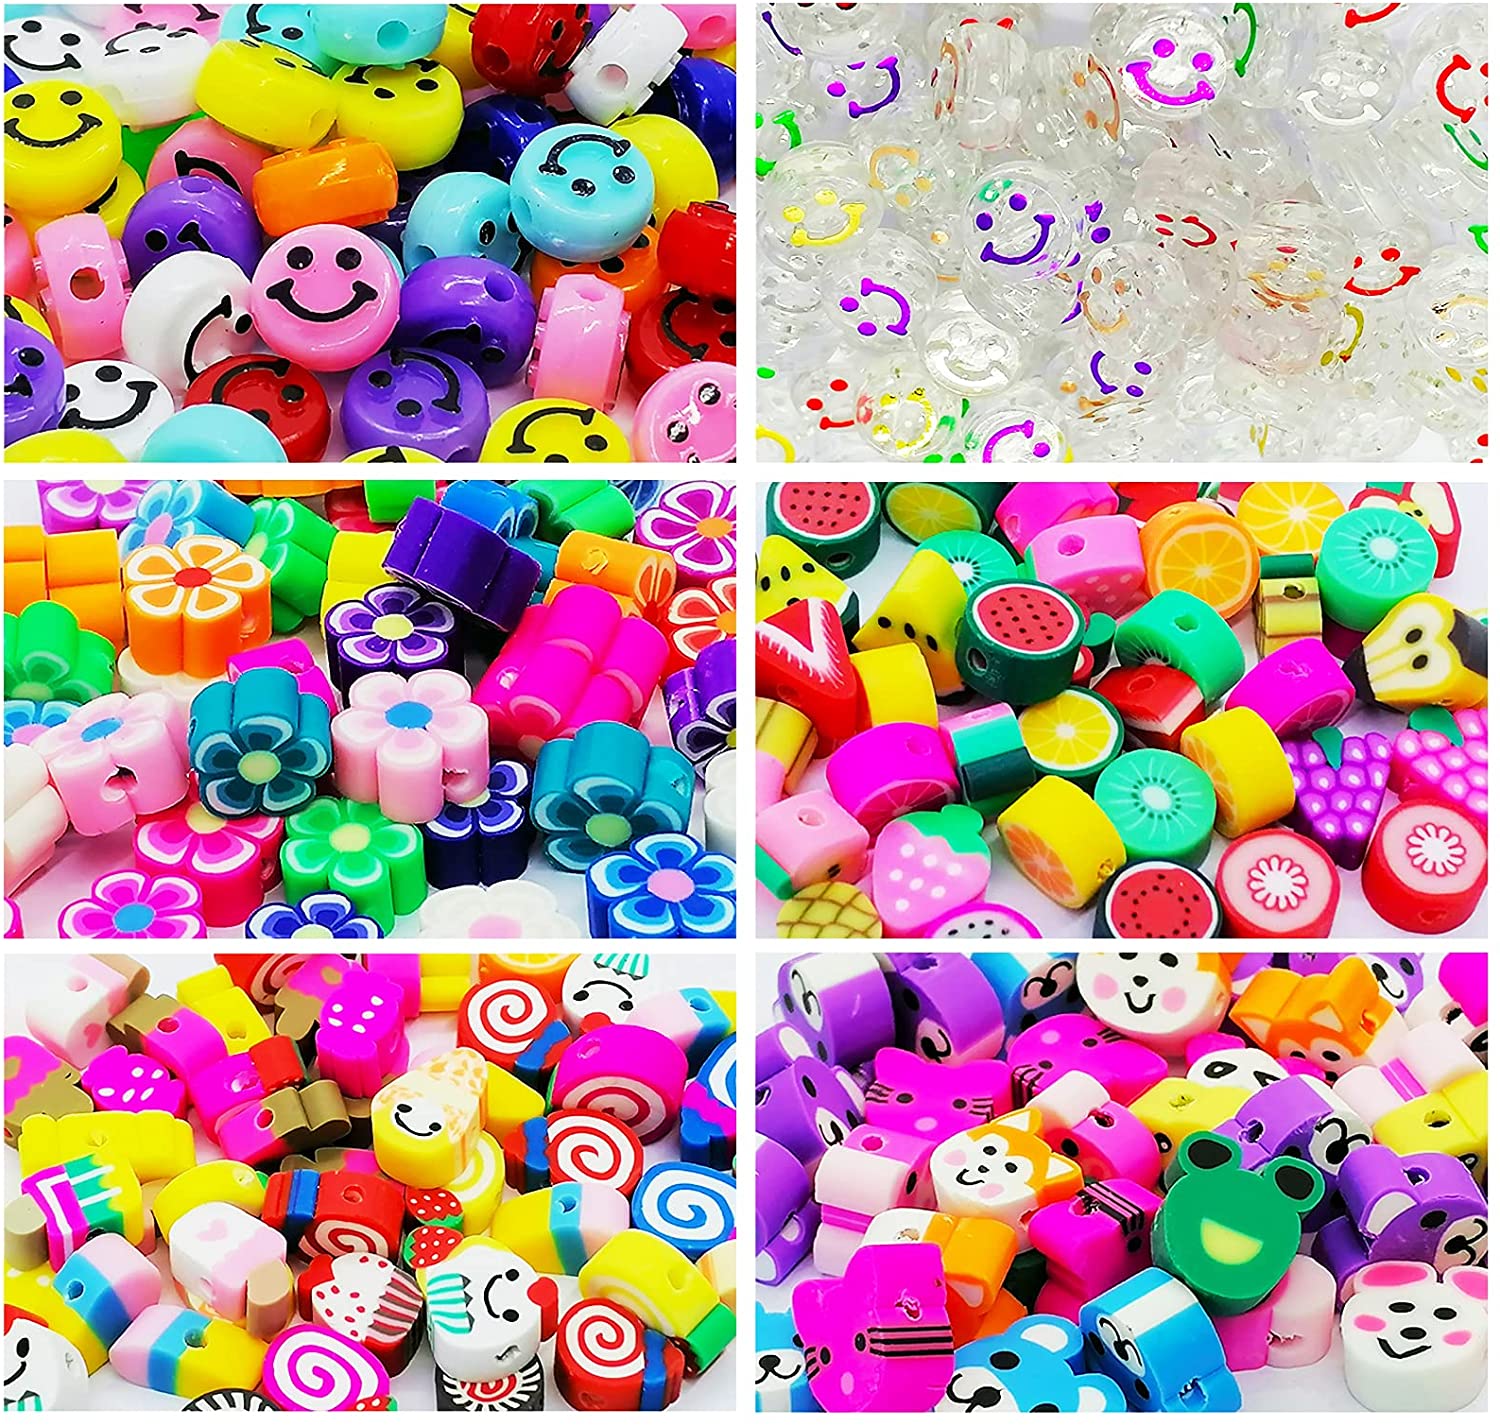 Clay embellished beads assortment